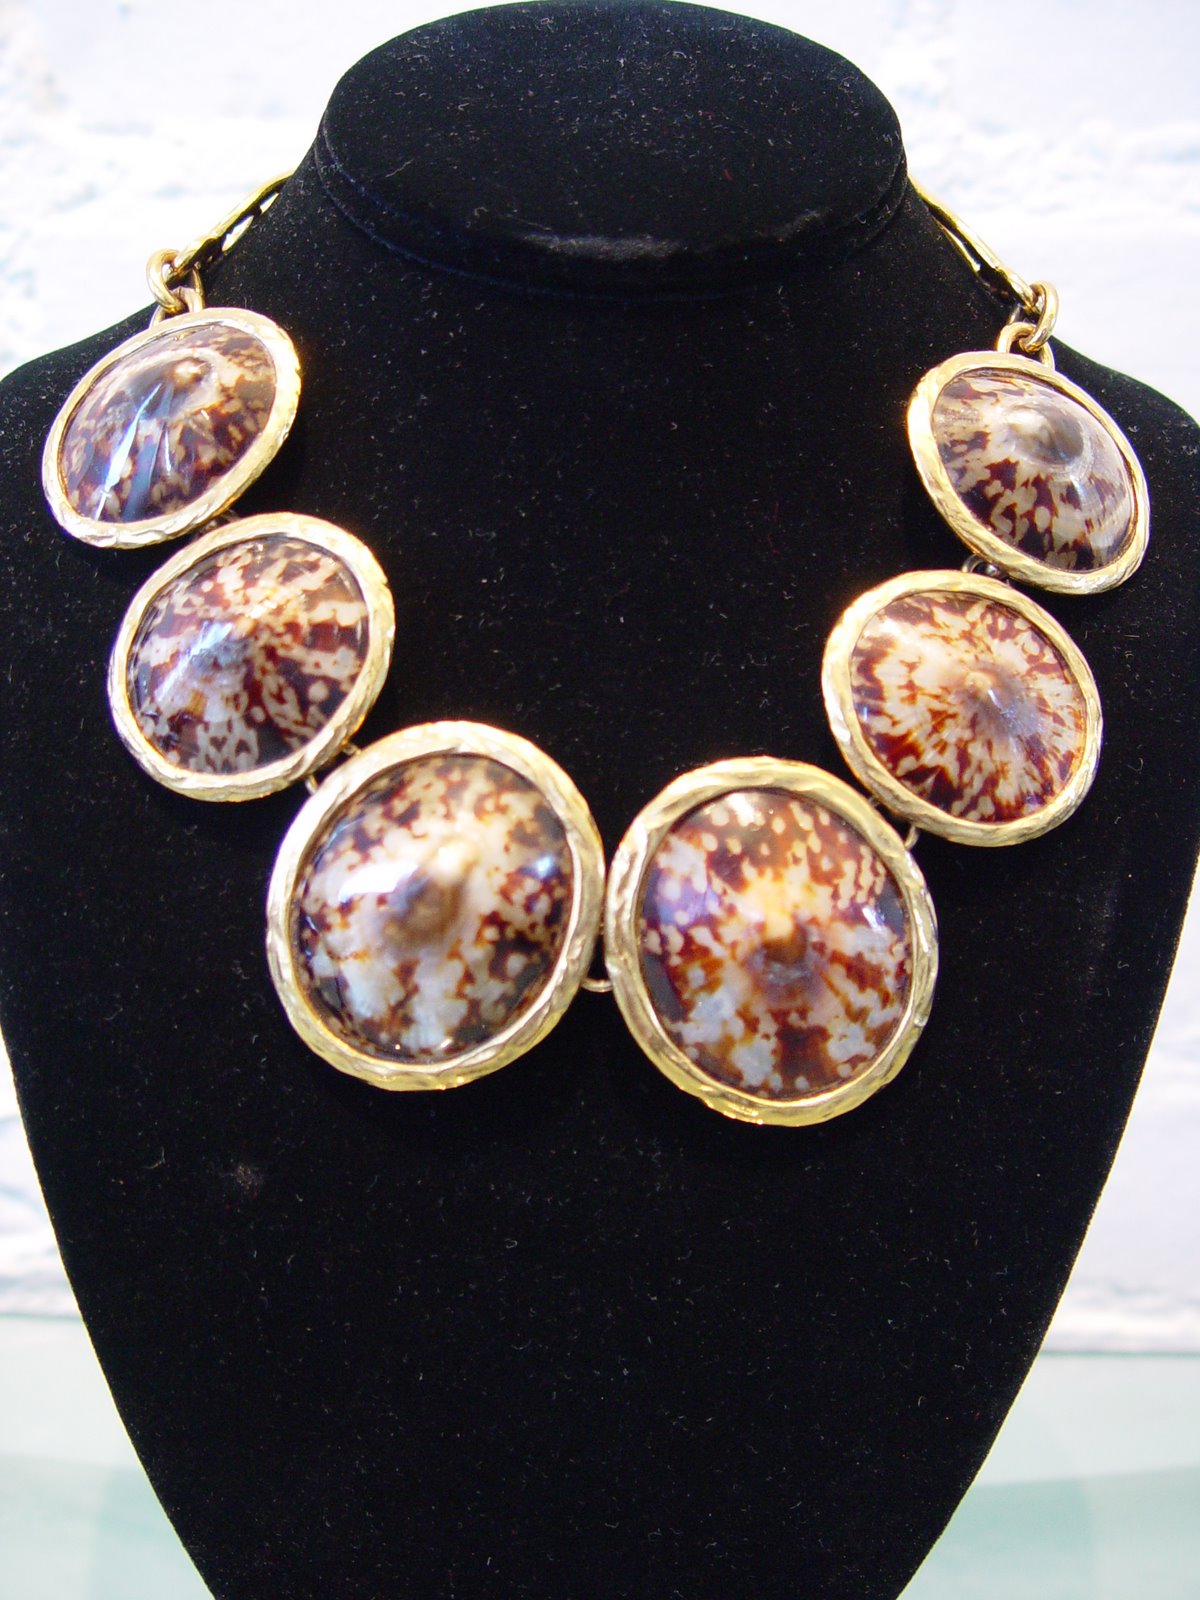 [YSL+RIVE+GAUCHE+NECKLACE+WITH+MATCHING+EARRINGS+SHELL+FRAMED+IN+GOLD+WITH+LINK+C+70S.JPG+(1).JPG]